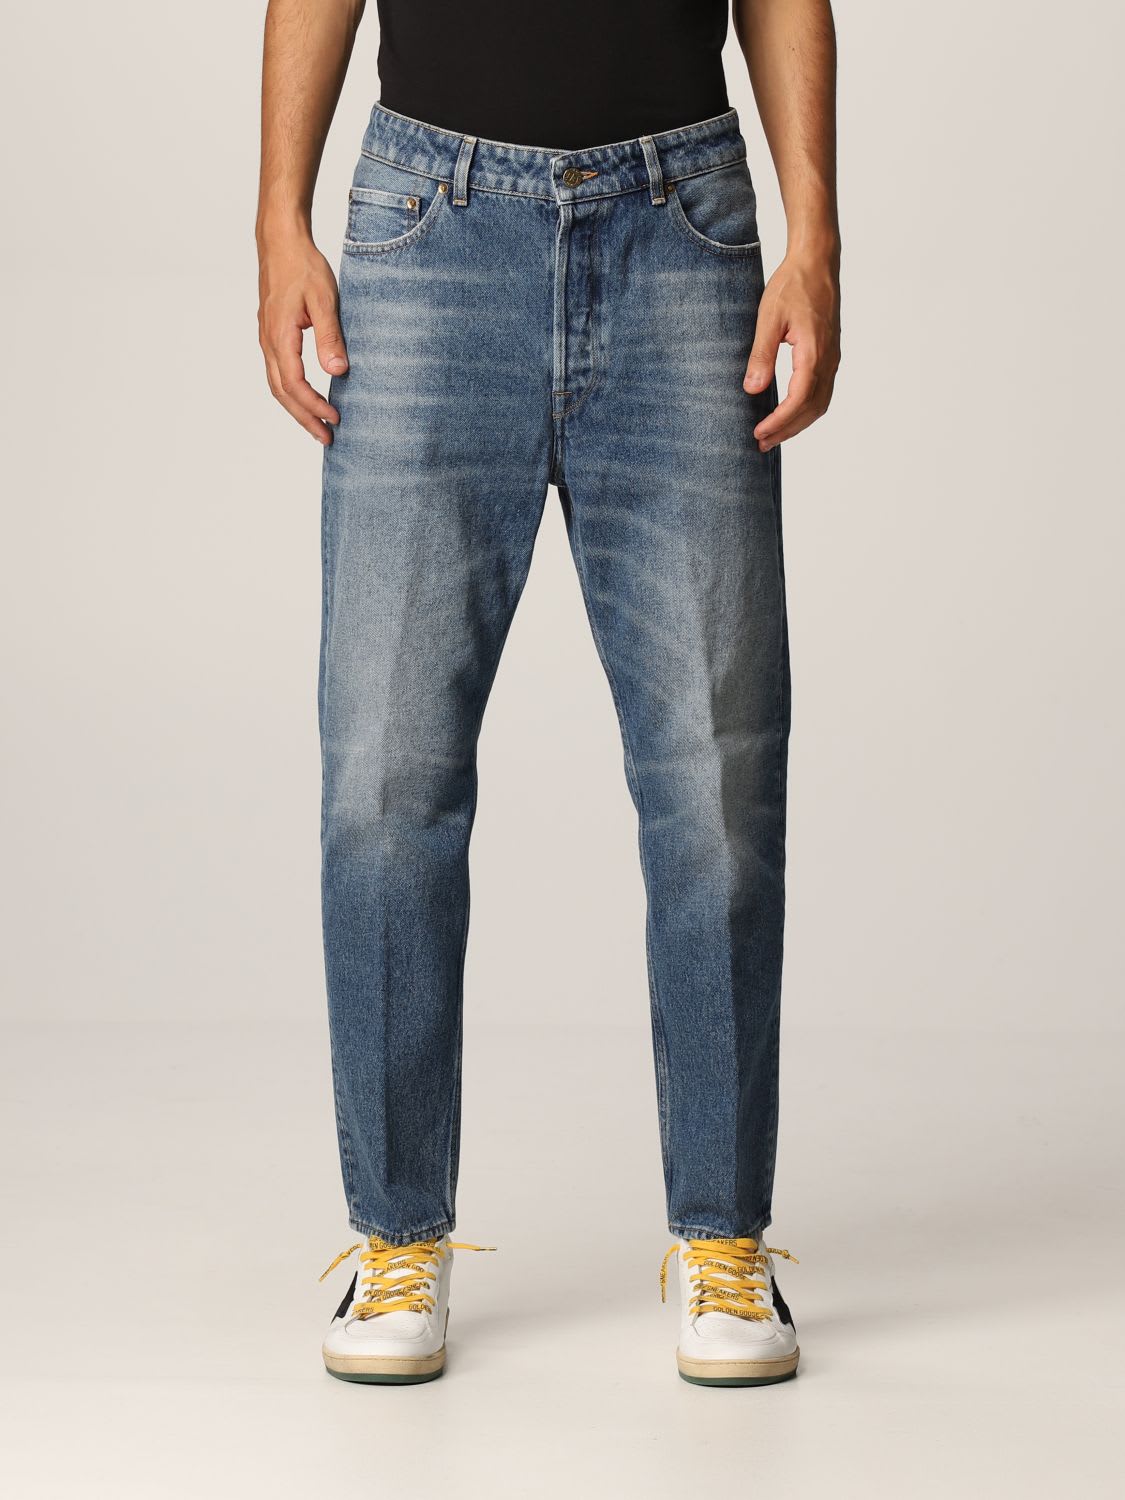 Golden Goose Jeans Happy Collection Golden Goose Jeans In Washed Denim